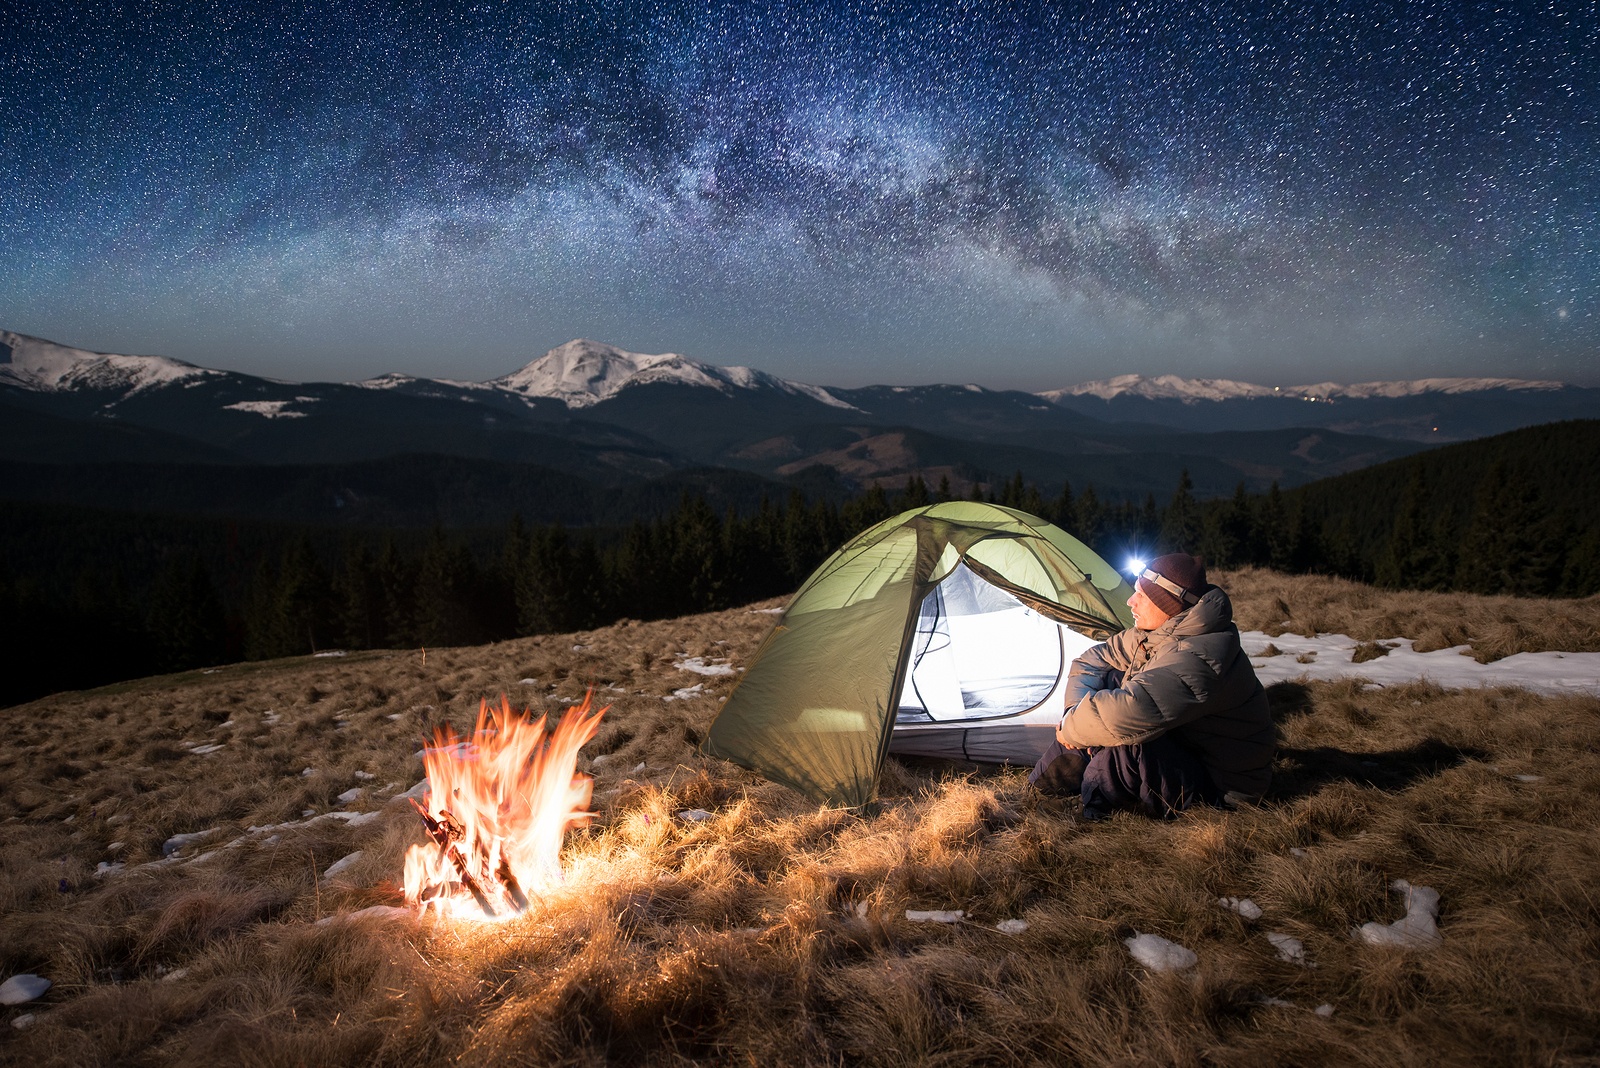 Make a campfire near your tent